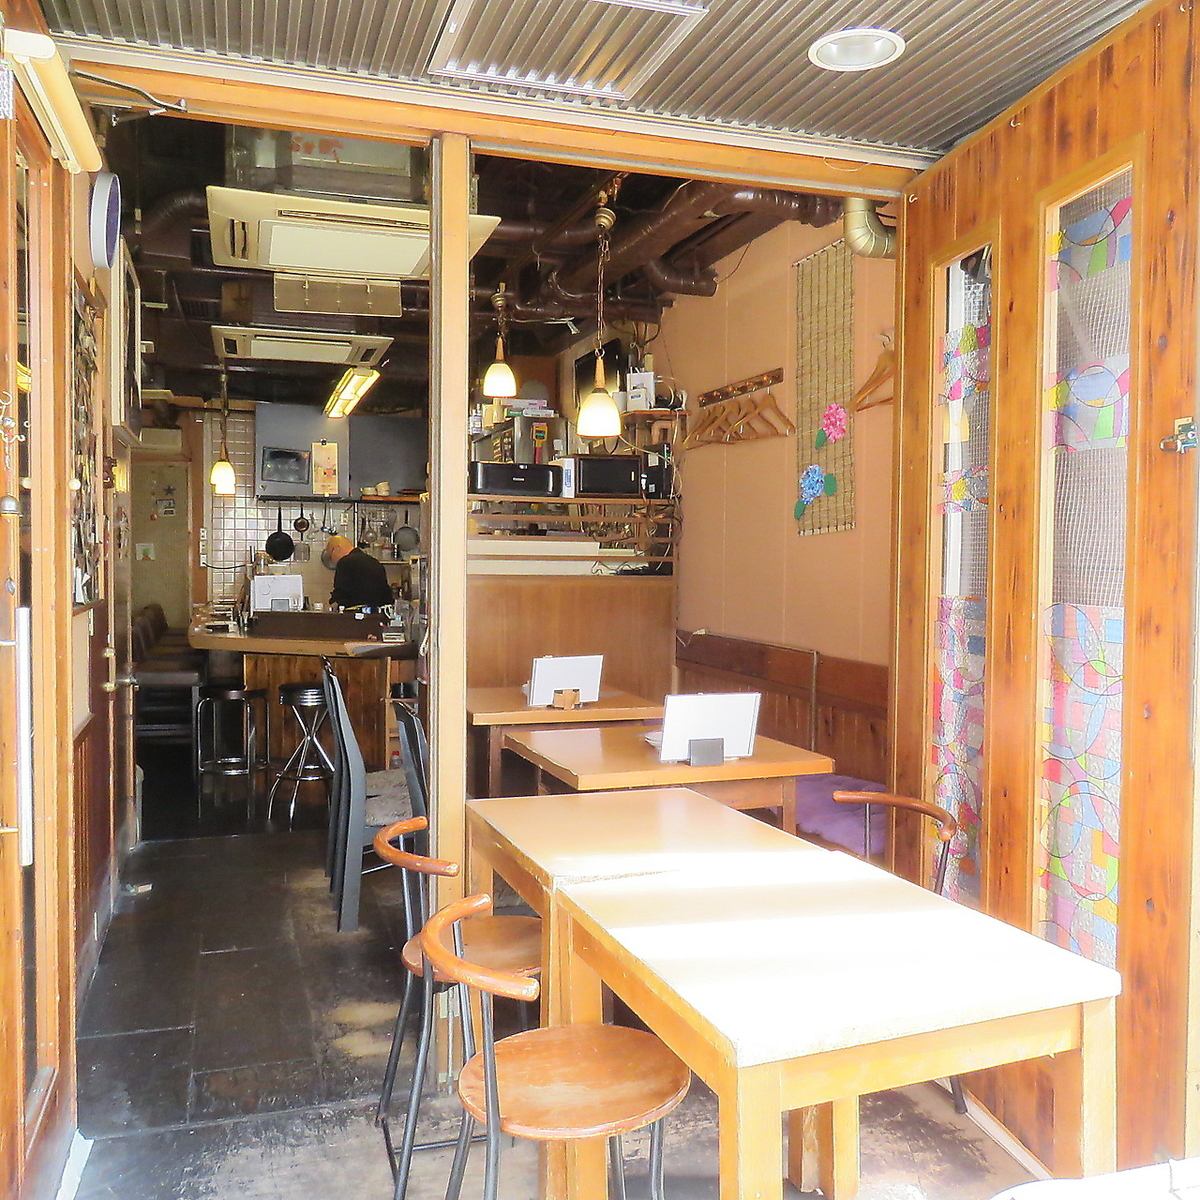 Your own favorite hideaway restaurant ★ Original dishes are enriched ♪